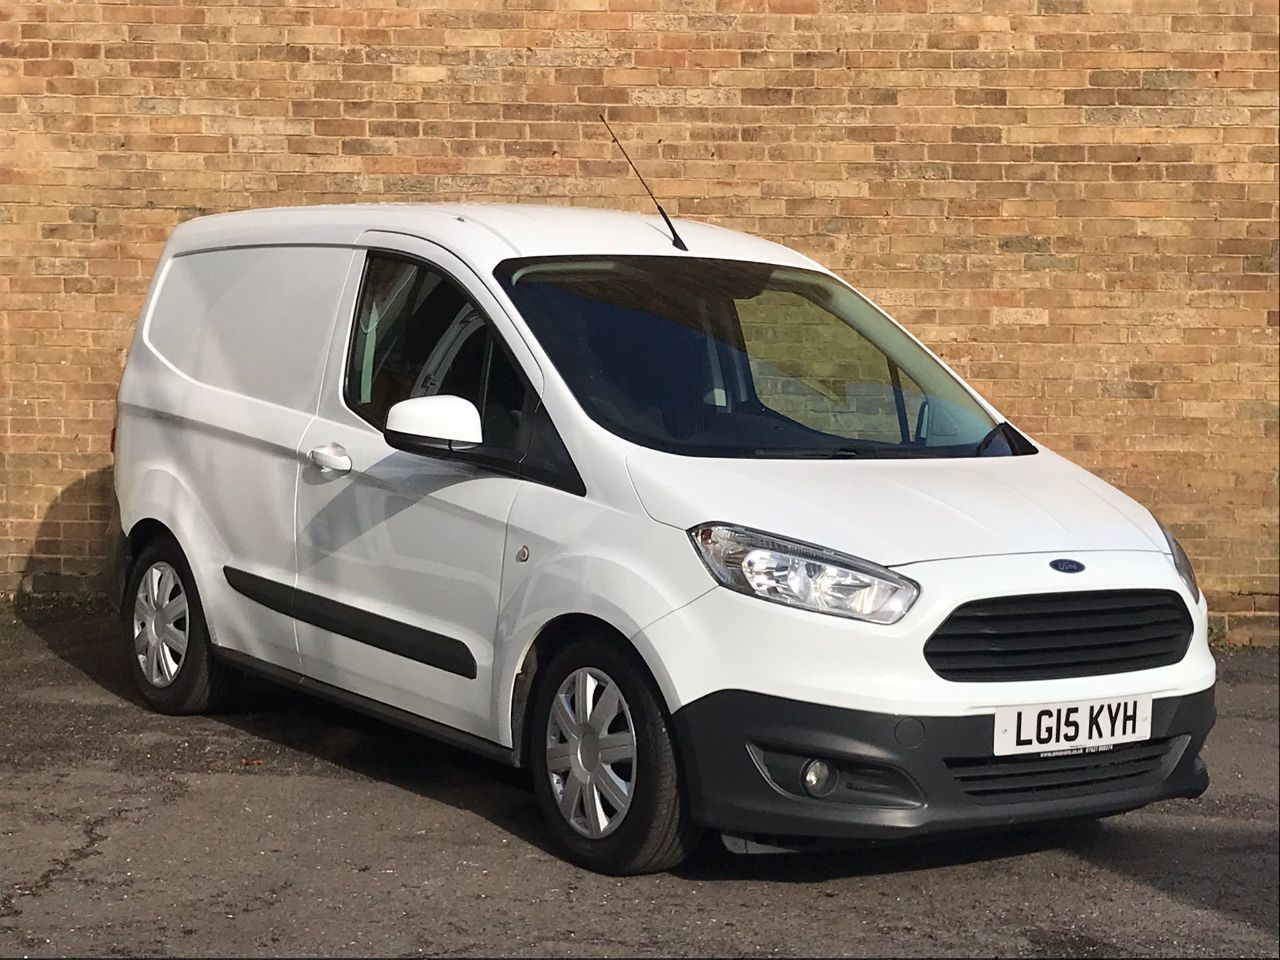 2015 Ford Transit Courier